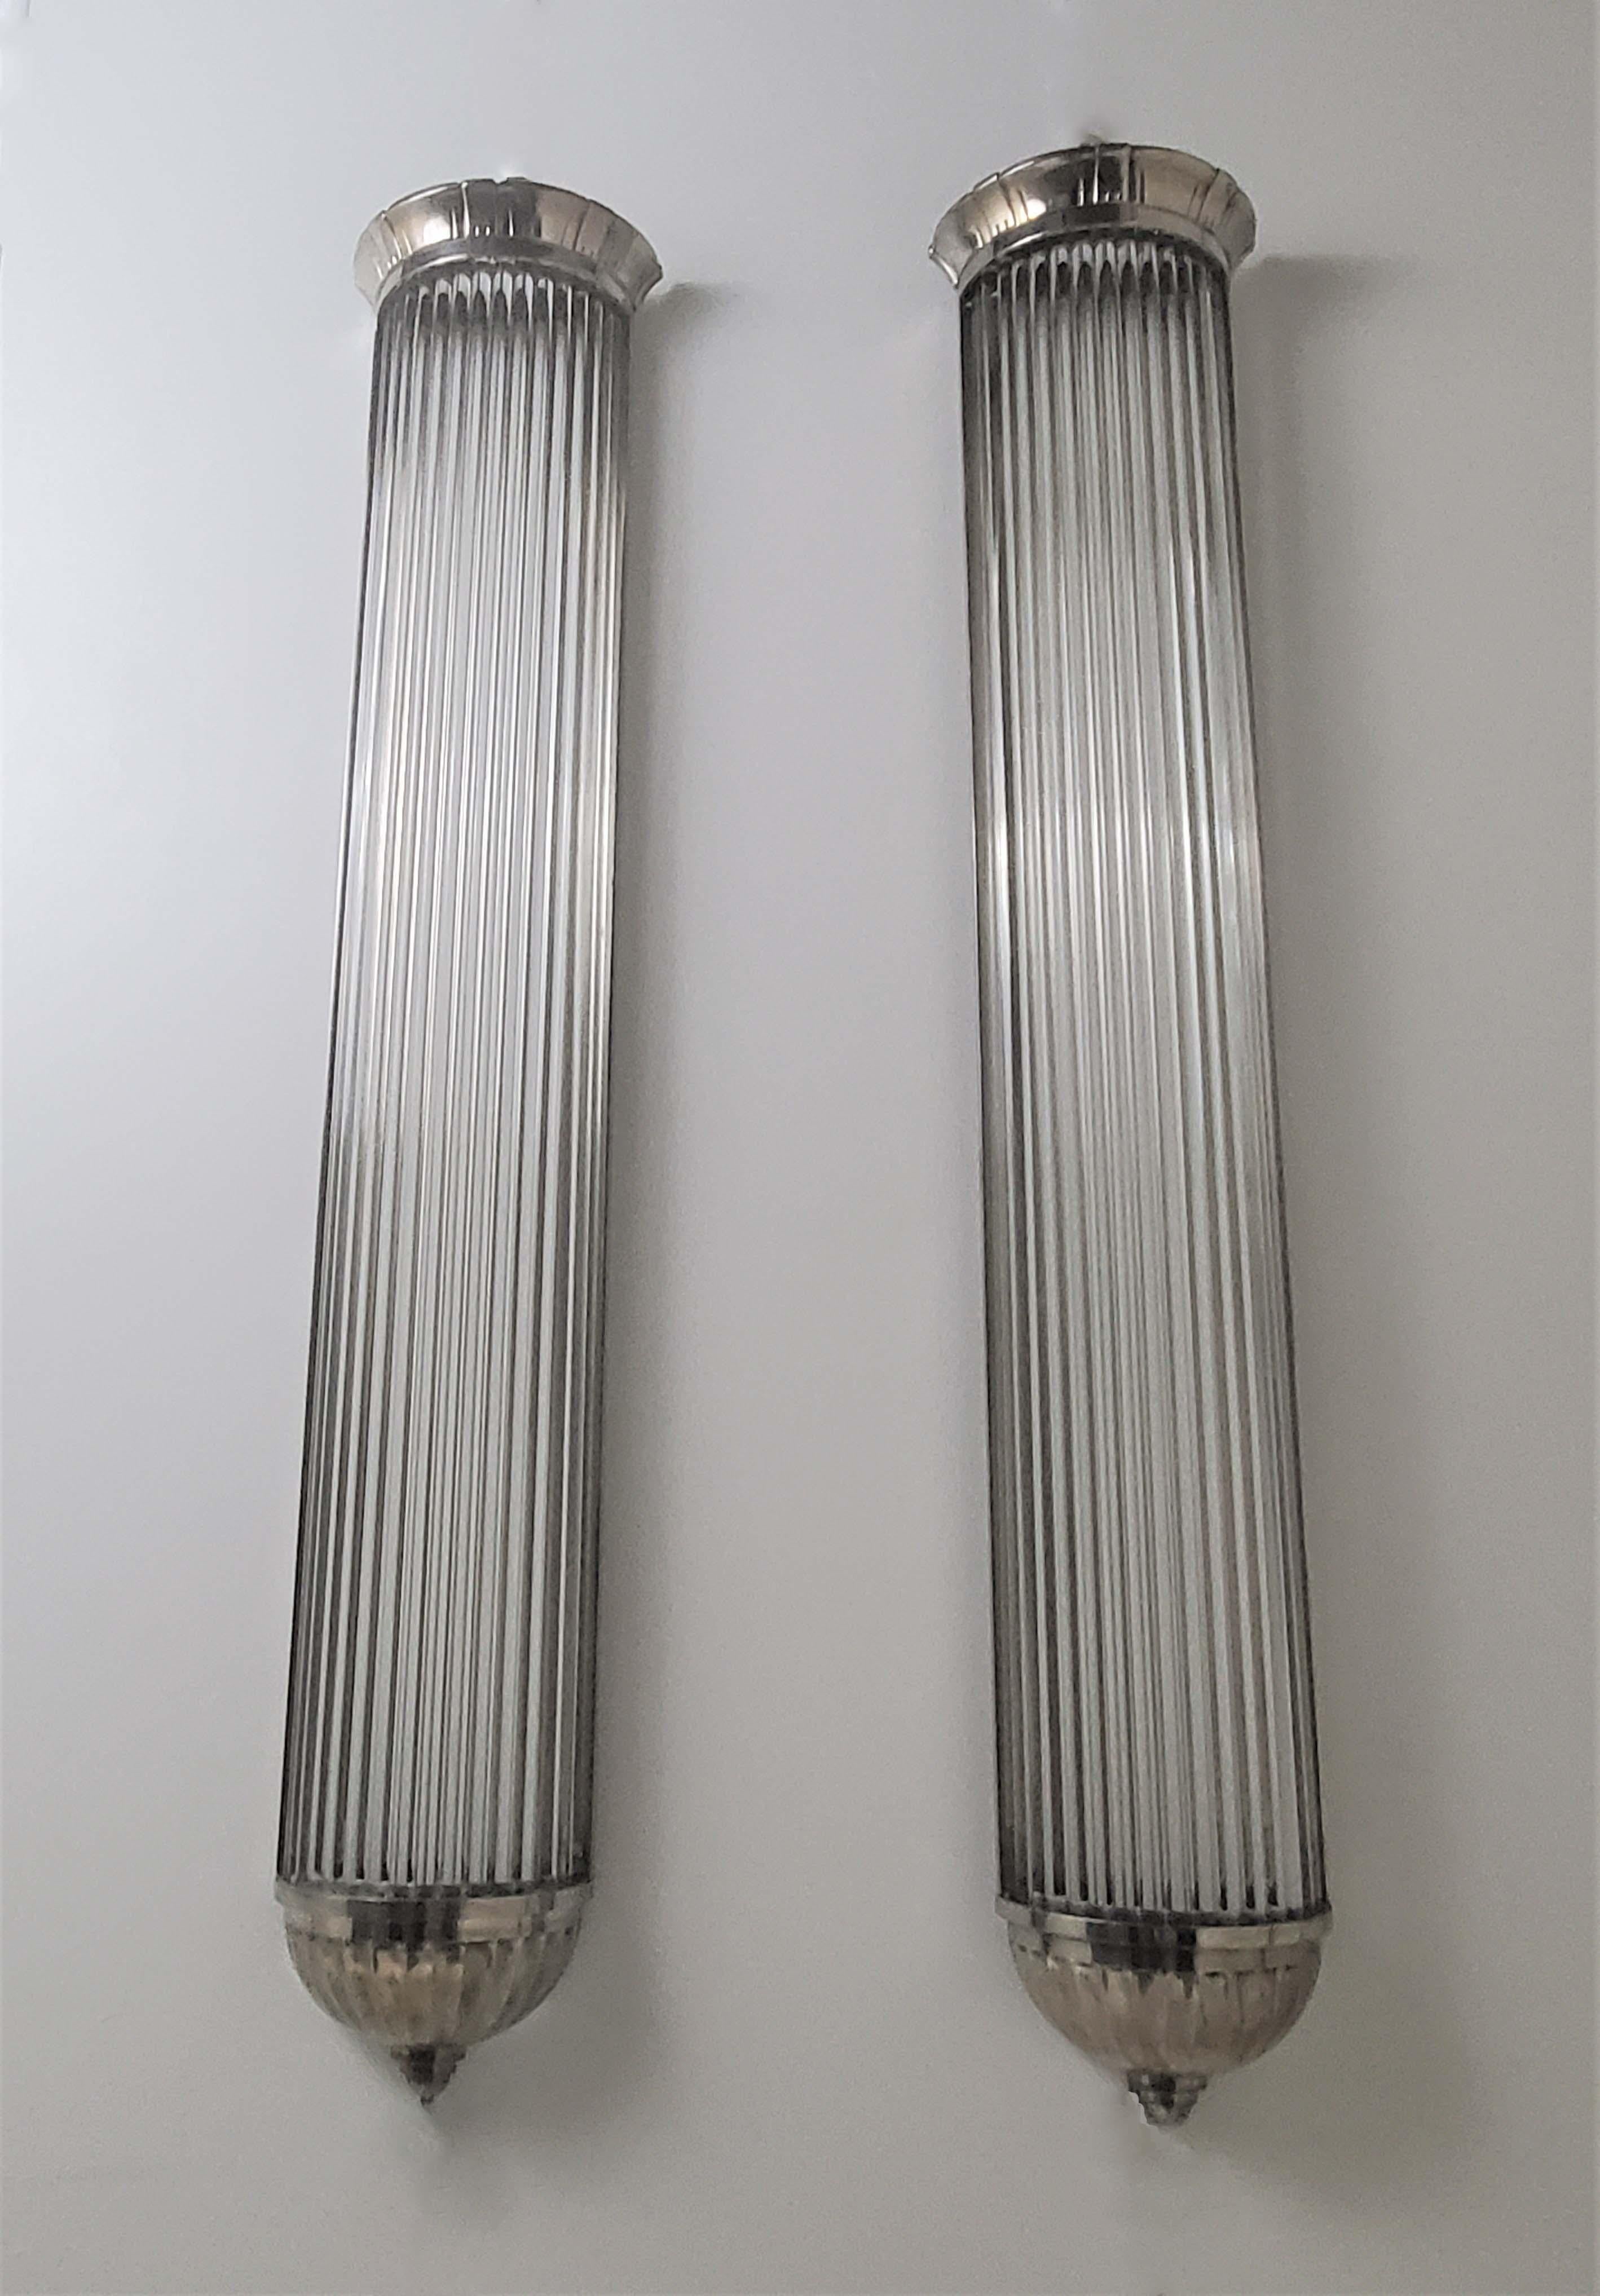 Monumental Pair of French Modernist Long Tubular Sconces by Petitot For Sale 4